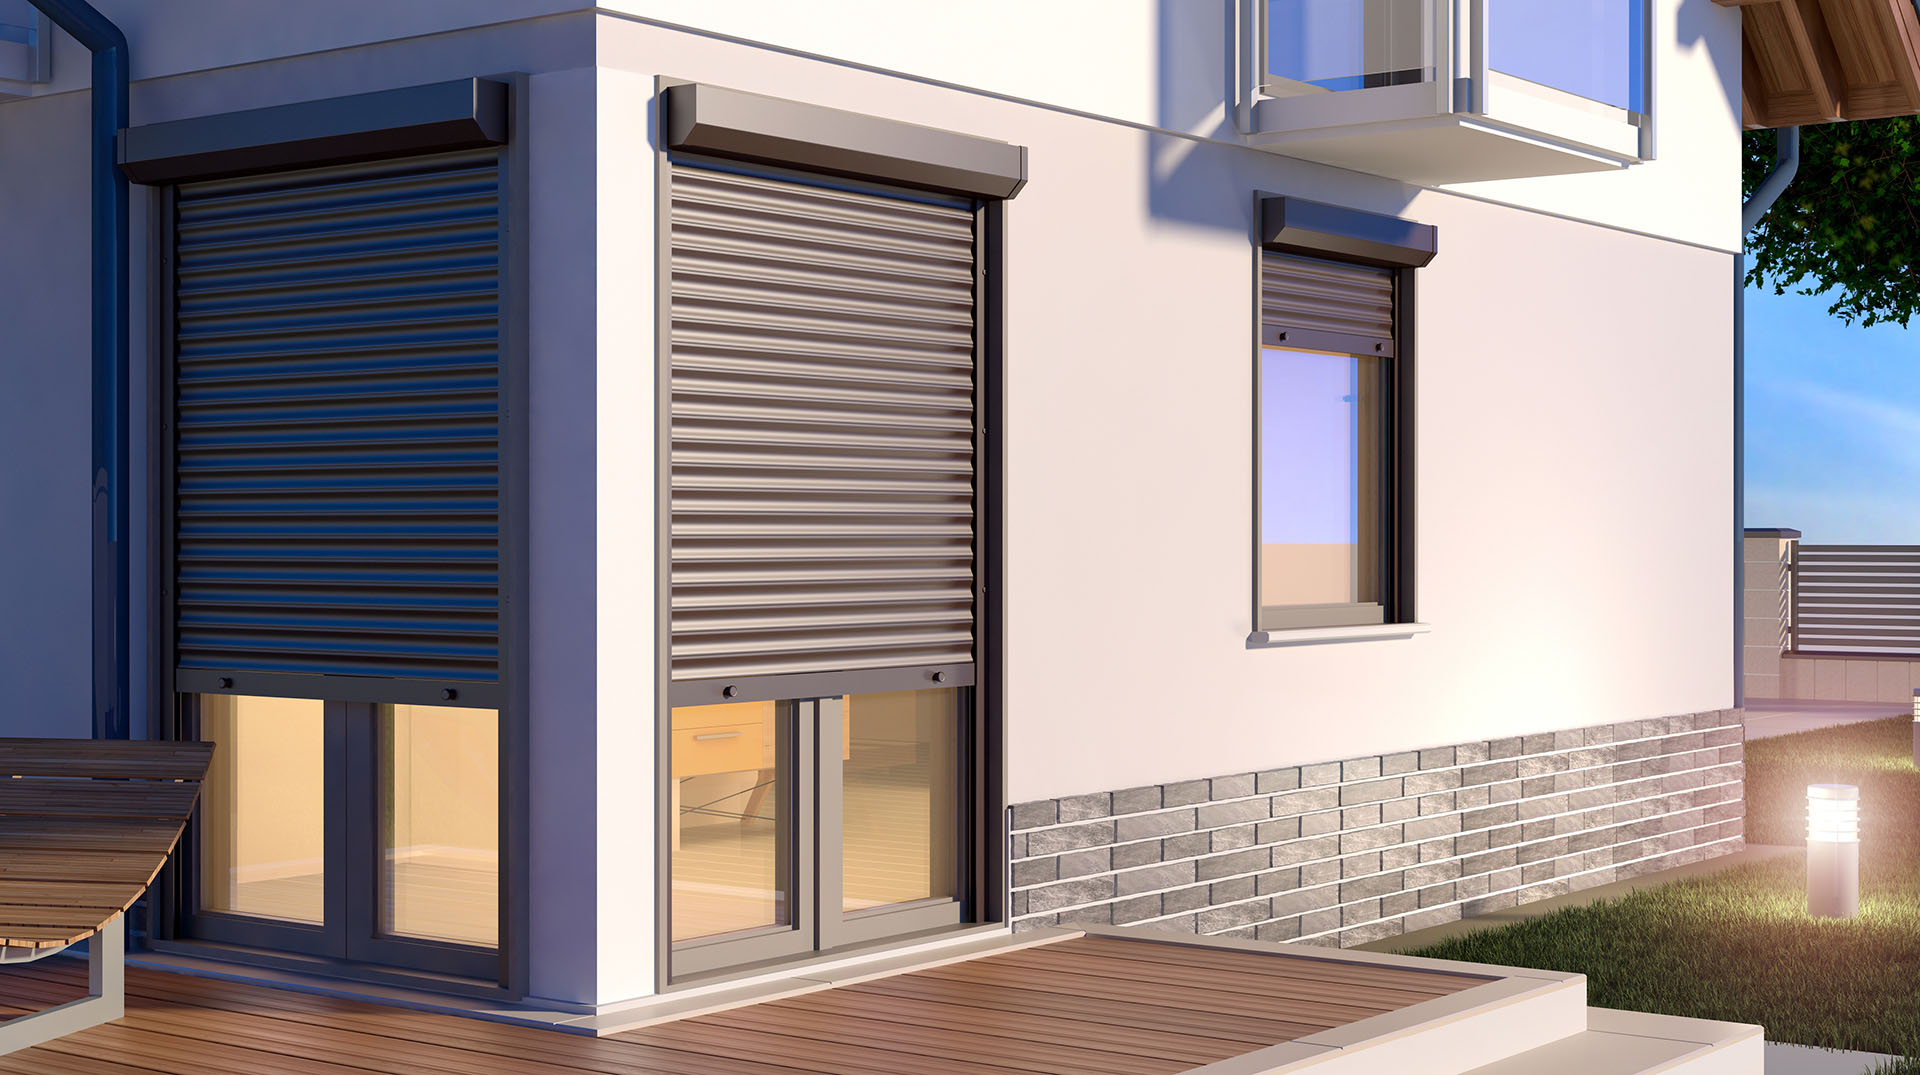 About Our Aluminium Roller Shutters